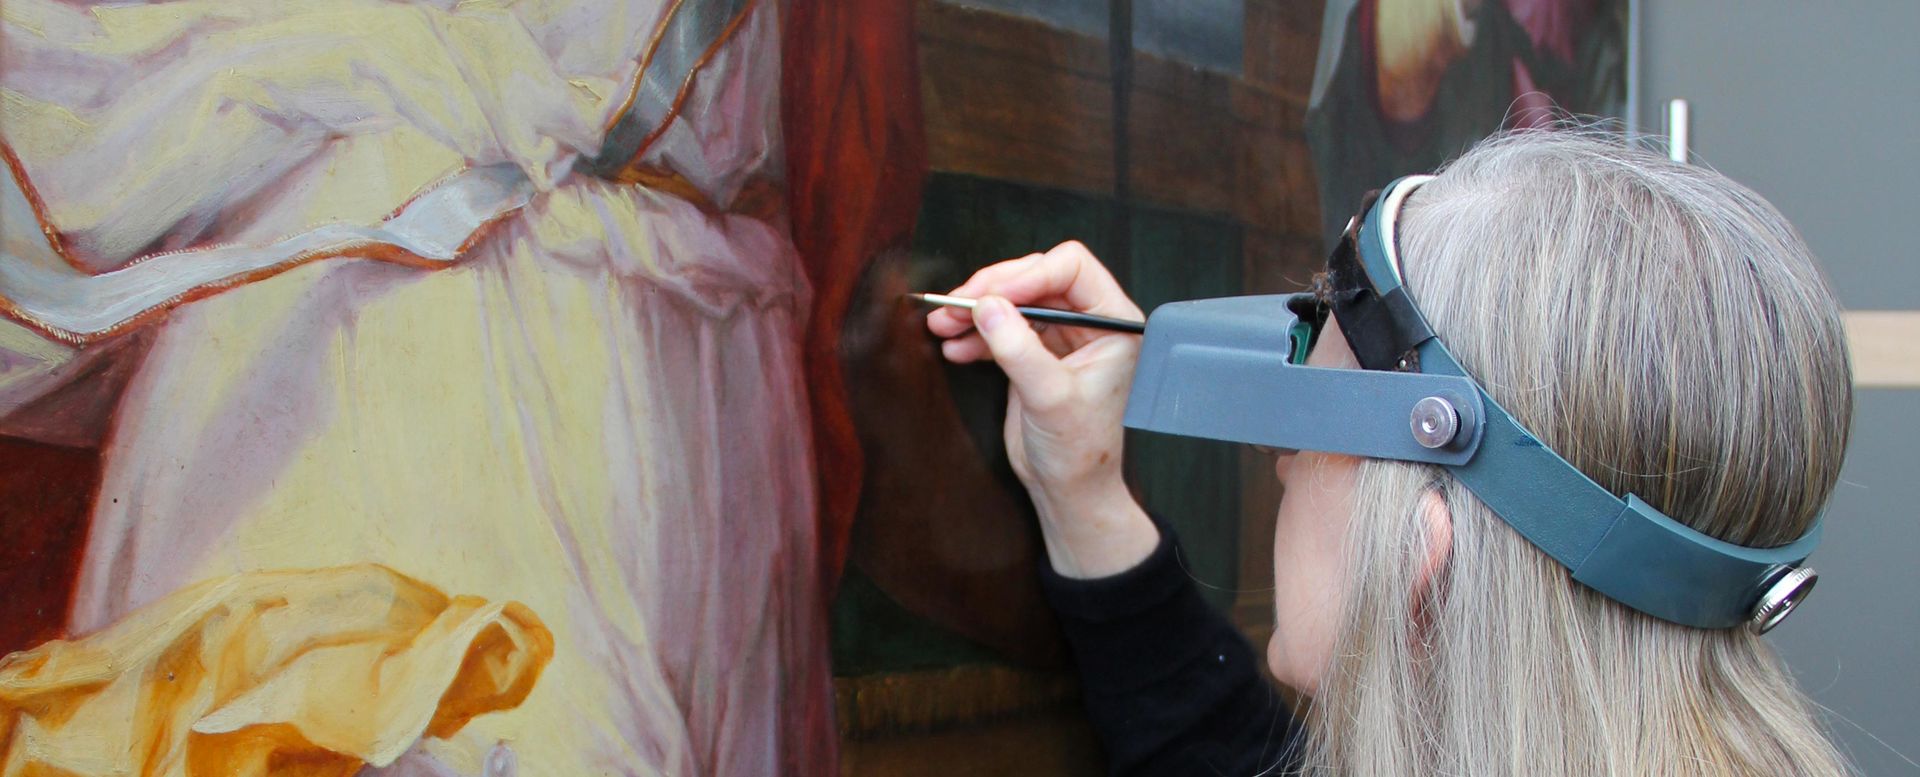 A conservator analyzes a painting up close